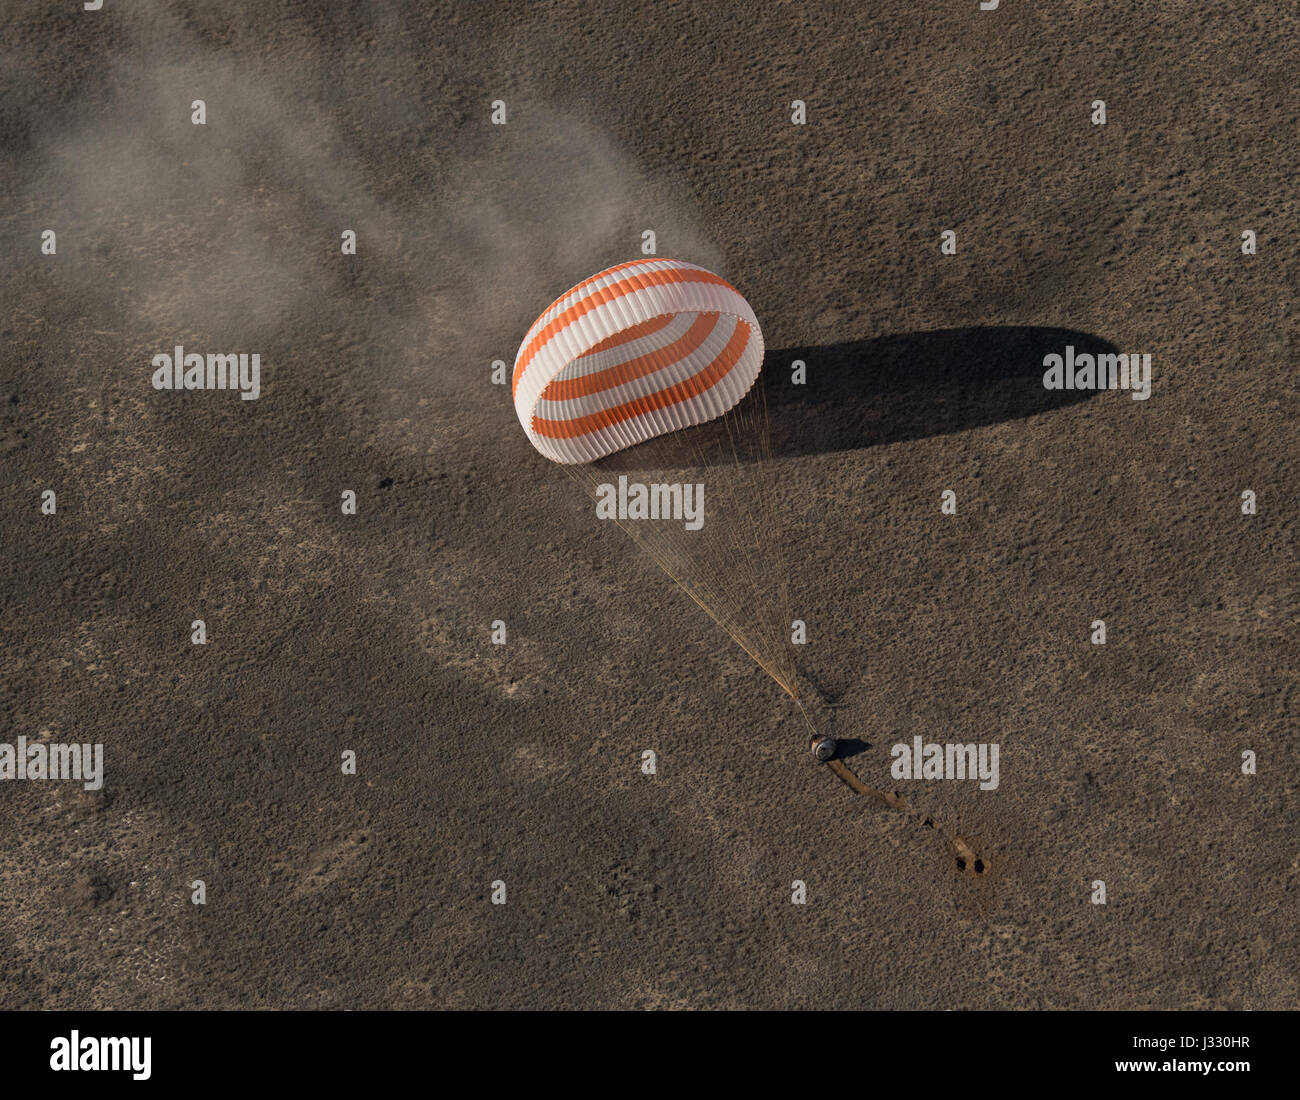 The Soyuz MS-02 spacecraft is seen as it lands with Expedition 50 Commander Shane Kimbrough of NASA and Flight Engineers Sergey Ryzhikov and Andrey Borisenko of Roscosmos near the town of Zhezkazgan, Kazakhstan on Monday, April 10, 2017 (Kazakh time). Kimbrough, Ryzhikov, and Borisenko are returning after 173 days in space where they served as members of the Expedition 49 and 50 crews onboard the International Space Station. Photo Credit: (NASA/Bill Ingalls) Stock Photo